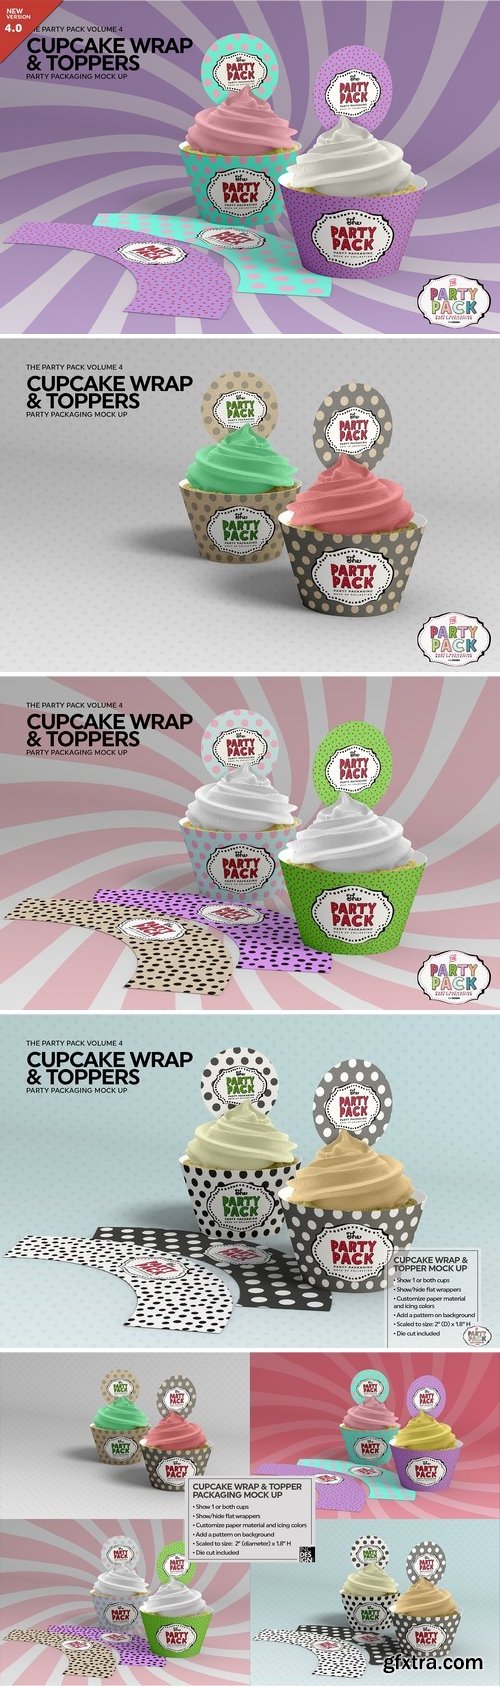 CM - Cupcake Wrap and Topper Mock Up 2199335